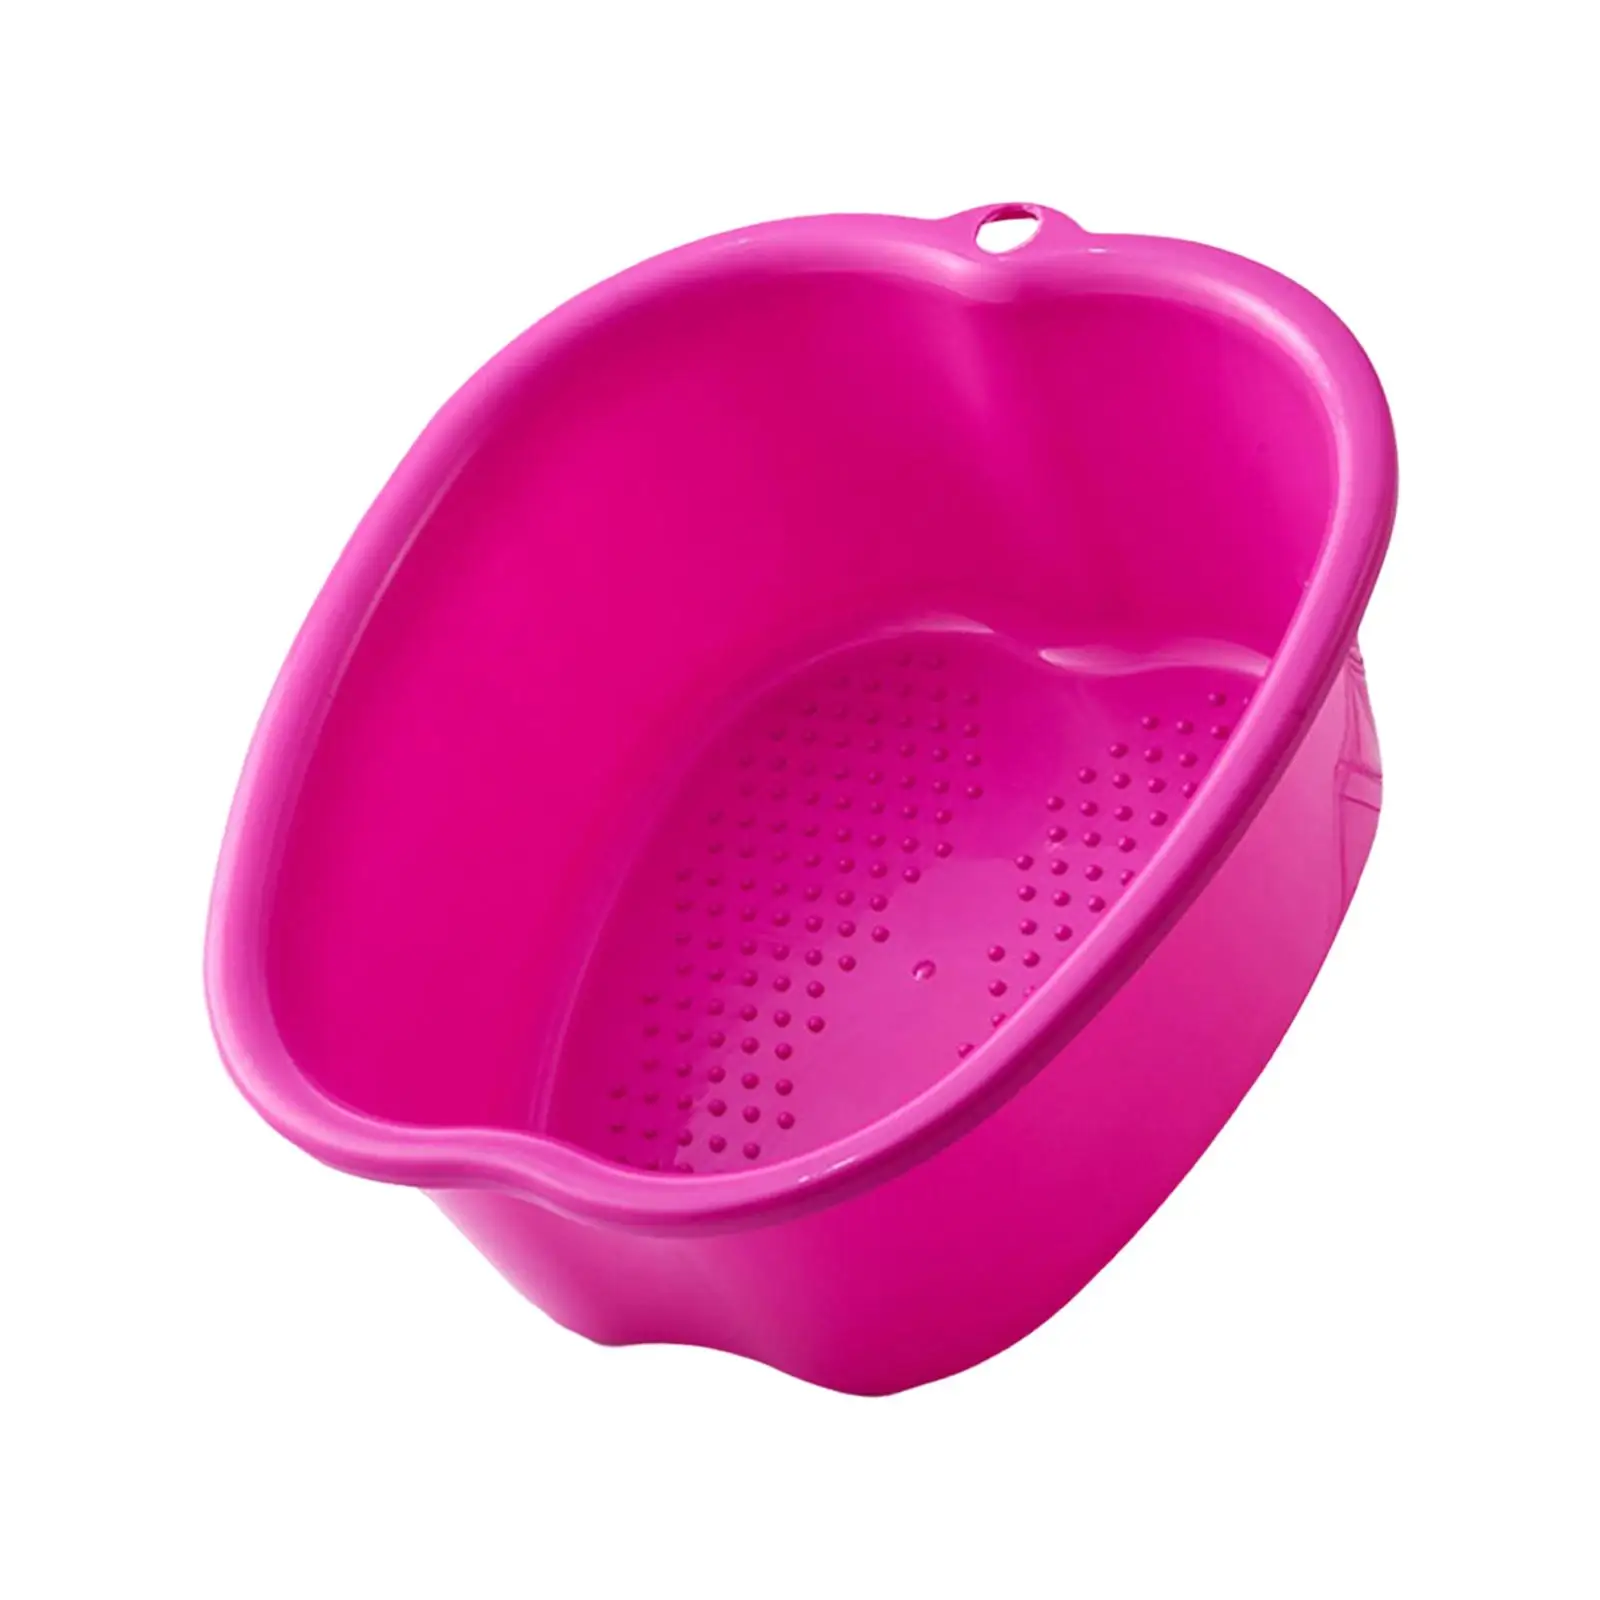 Foot Tub Large Plastic Portable Foot Bath SPA Basin for Toe Nails and Ankles